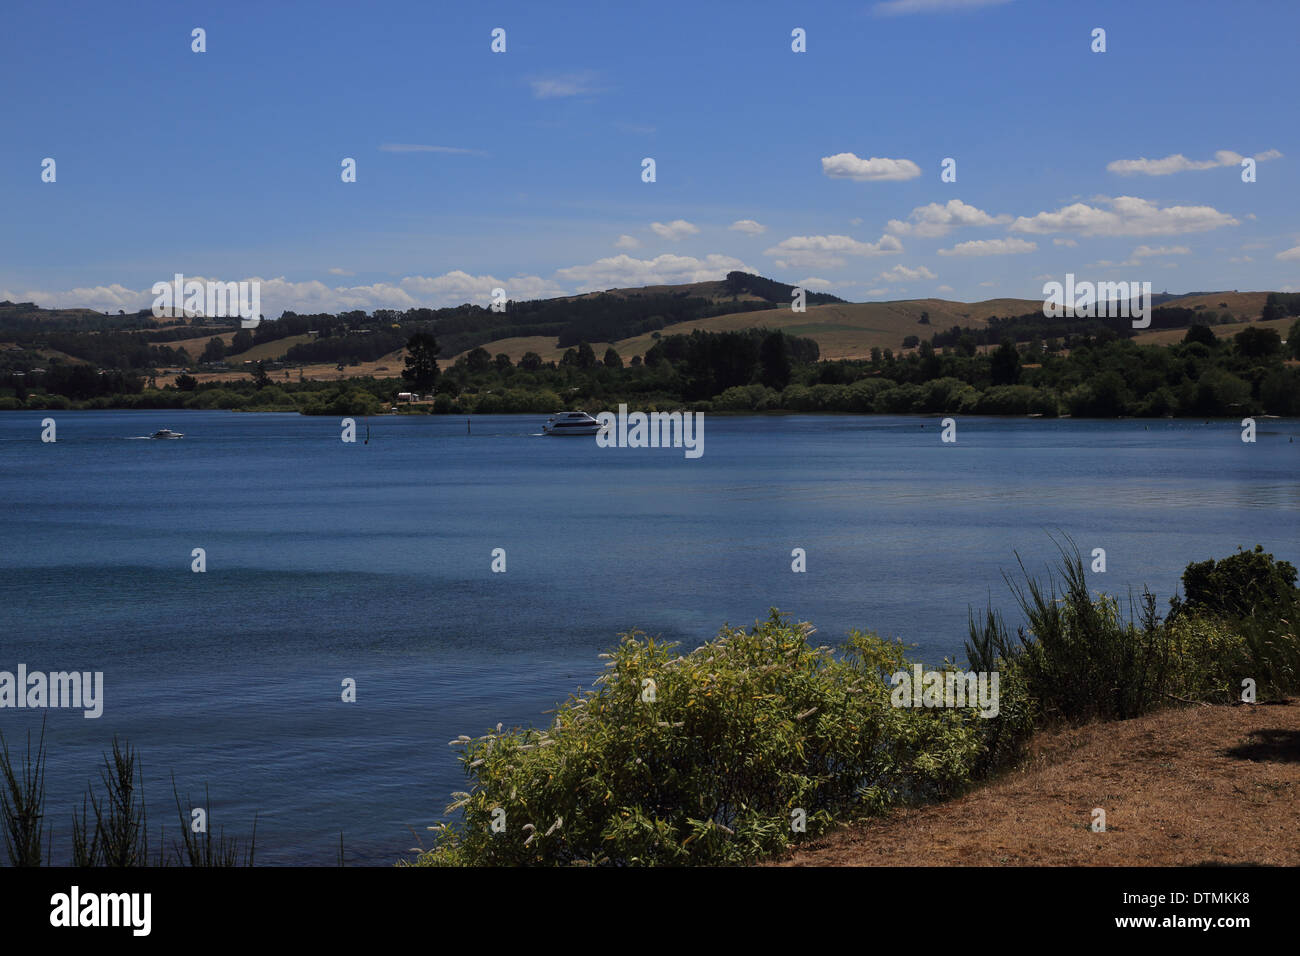 View of Great Lake Taupo, North Island, New Zealand Stock Photo